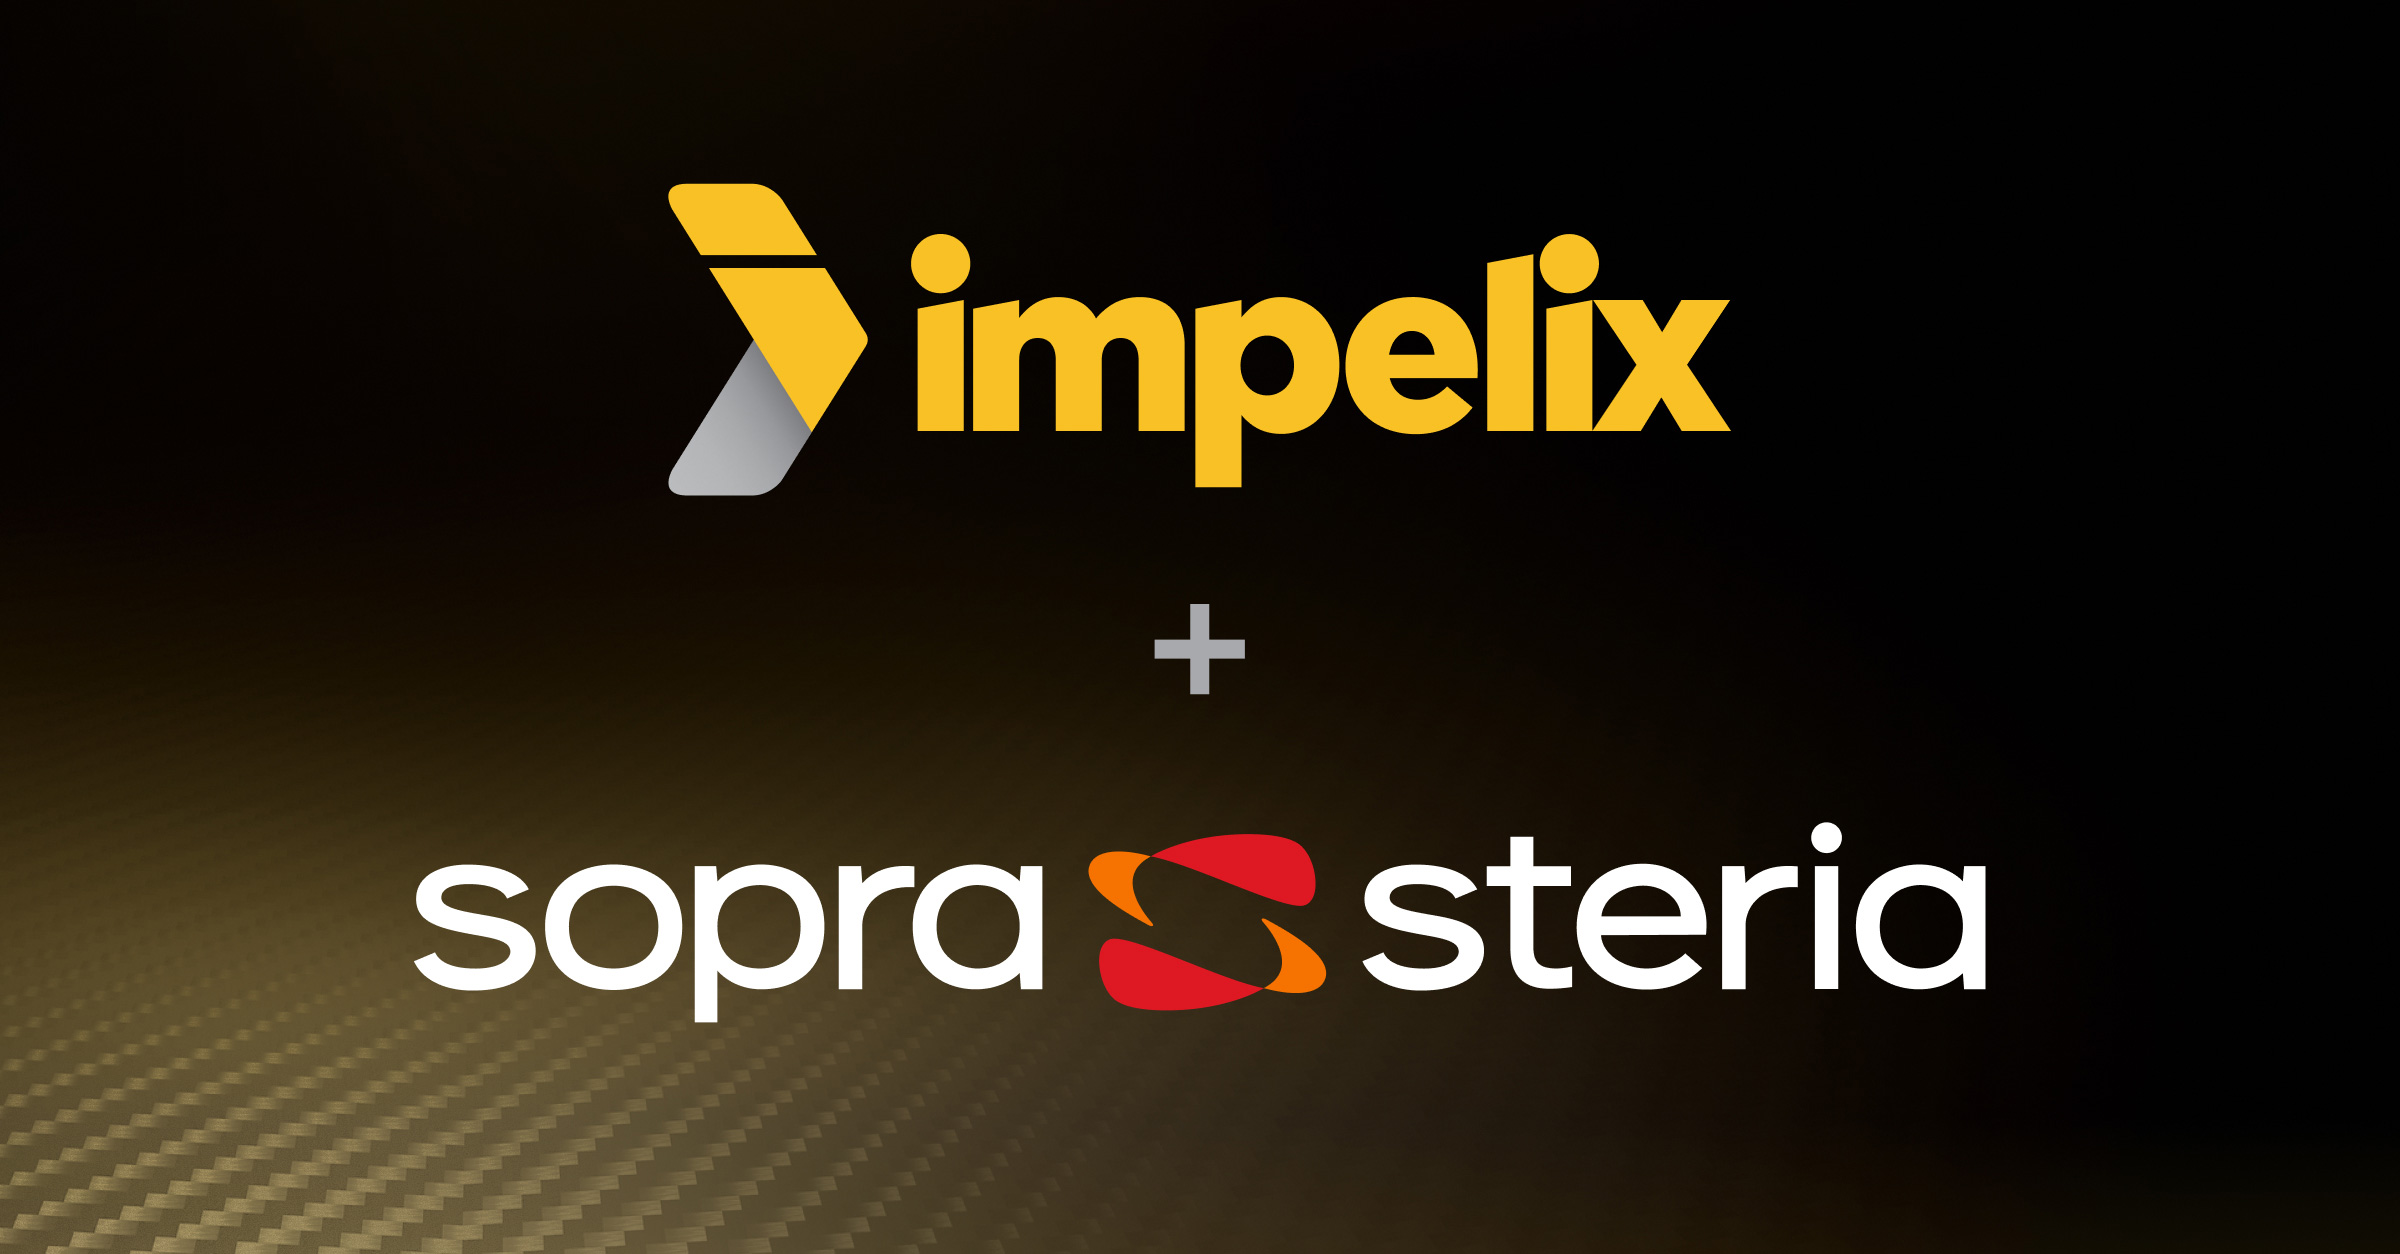 Impelix and Sopra Steria North America Unite to Offer Cutting-Edge Security, Risk, and Compliance Solutions